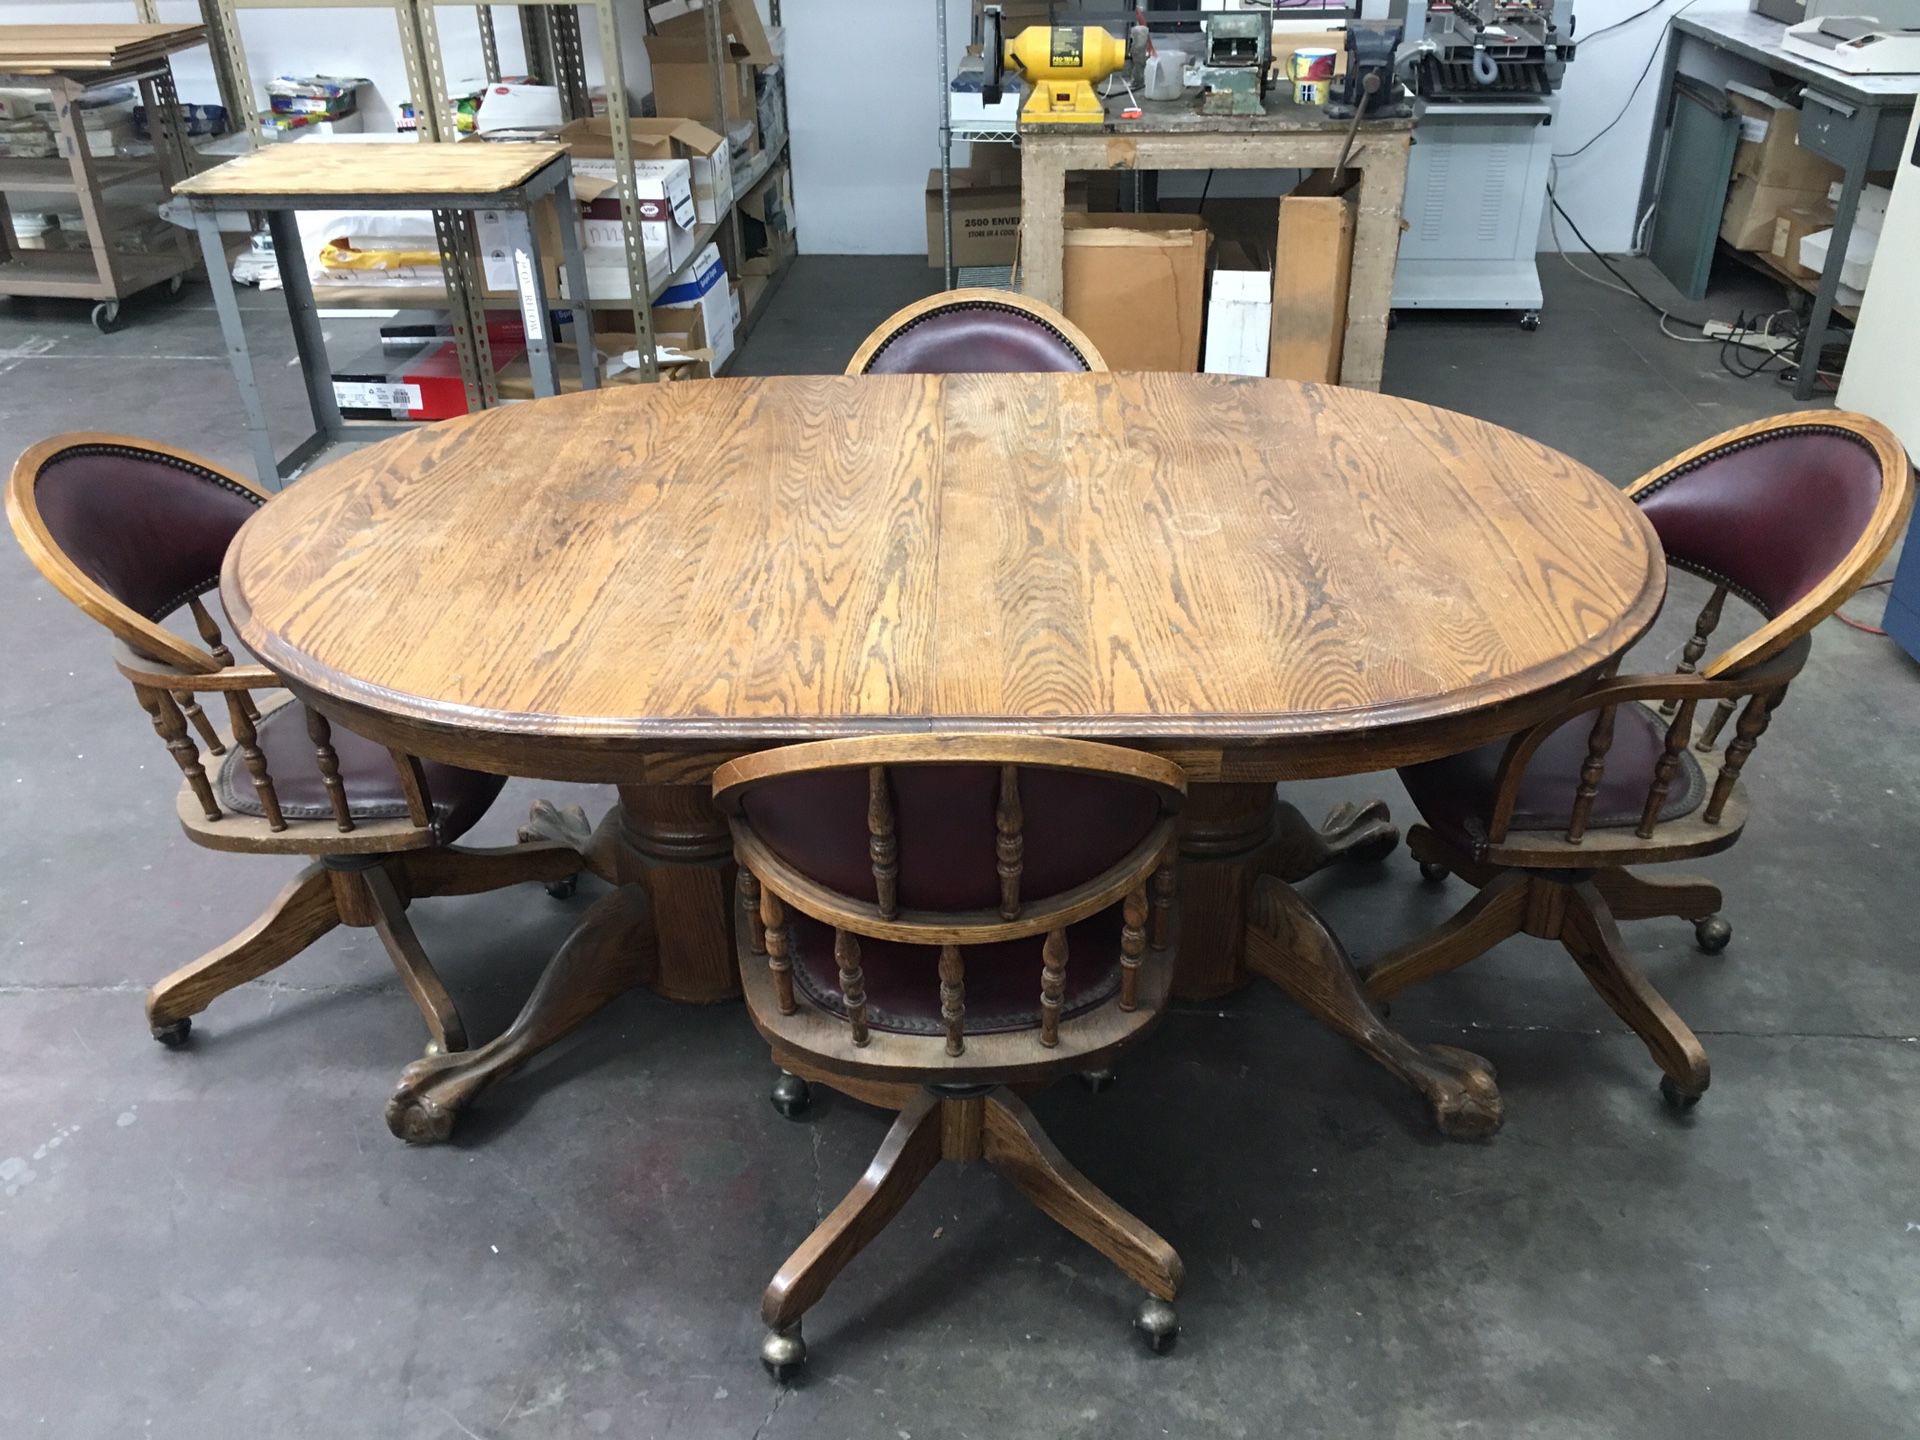 Antique Dining Table and 4 Chairs